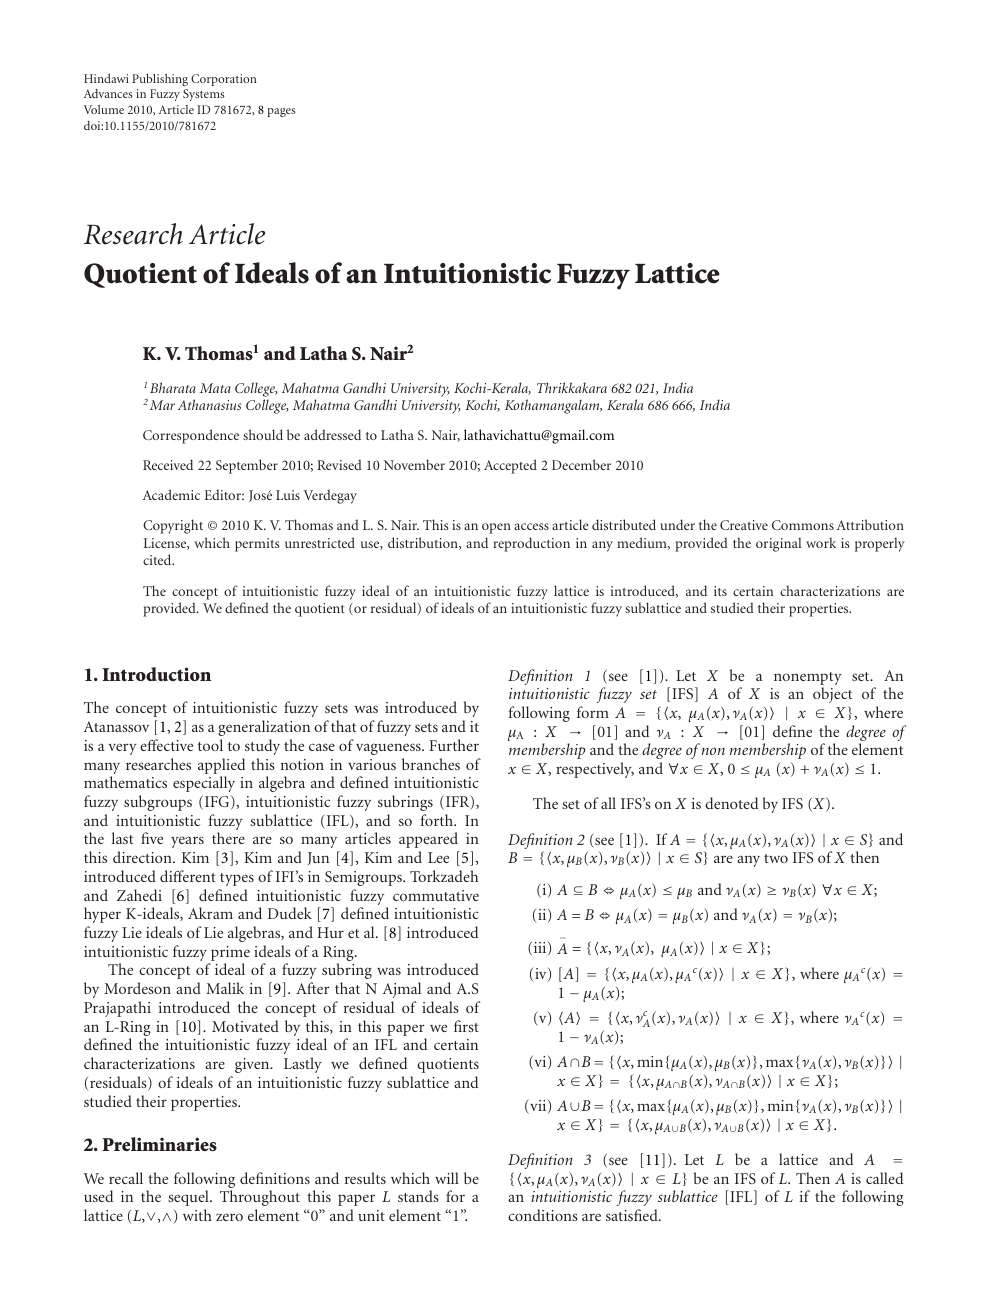 Quotient Of Ideals Of An Intuitionistic Fuzzy Lattice Topic Of Research Paper In Mathematics Download Scholarly Article Pdf And Read For Free On Cyberleninka Open Science Hub